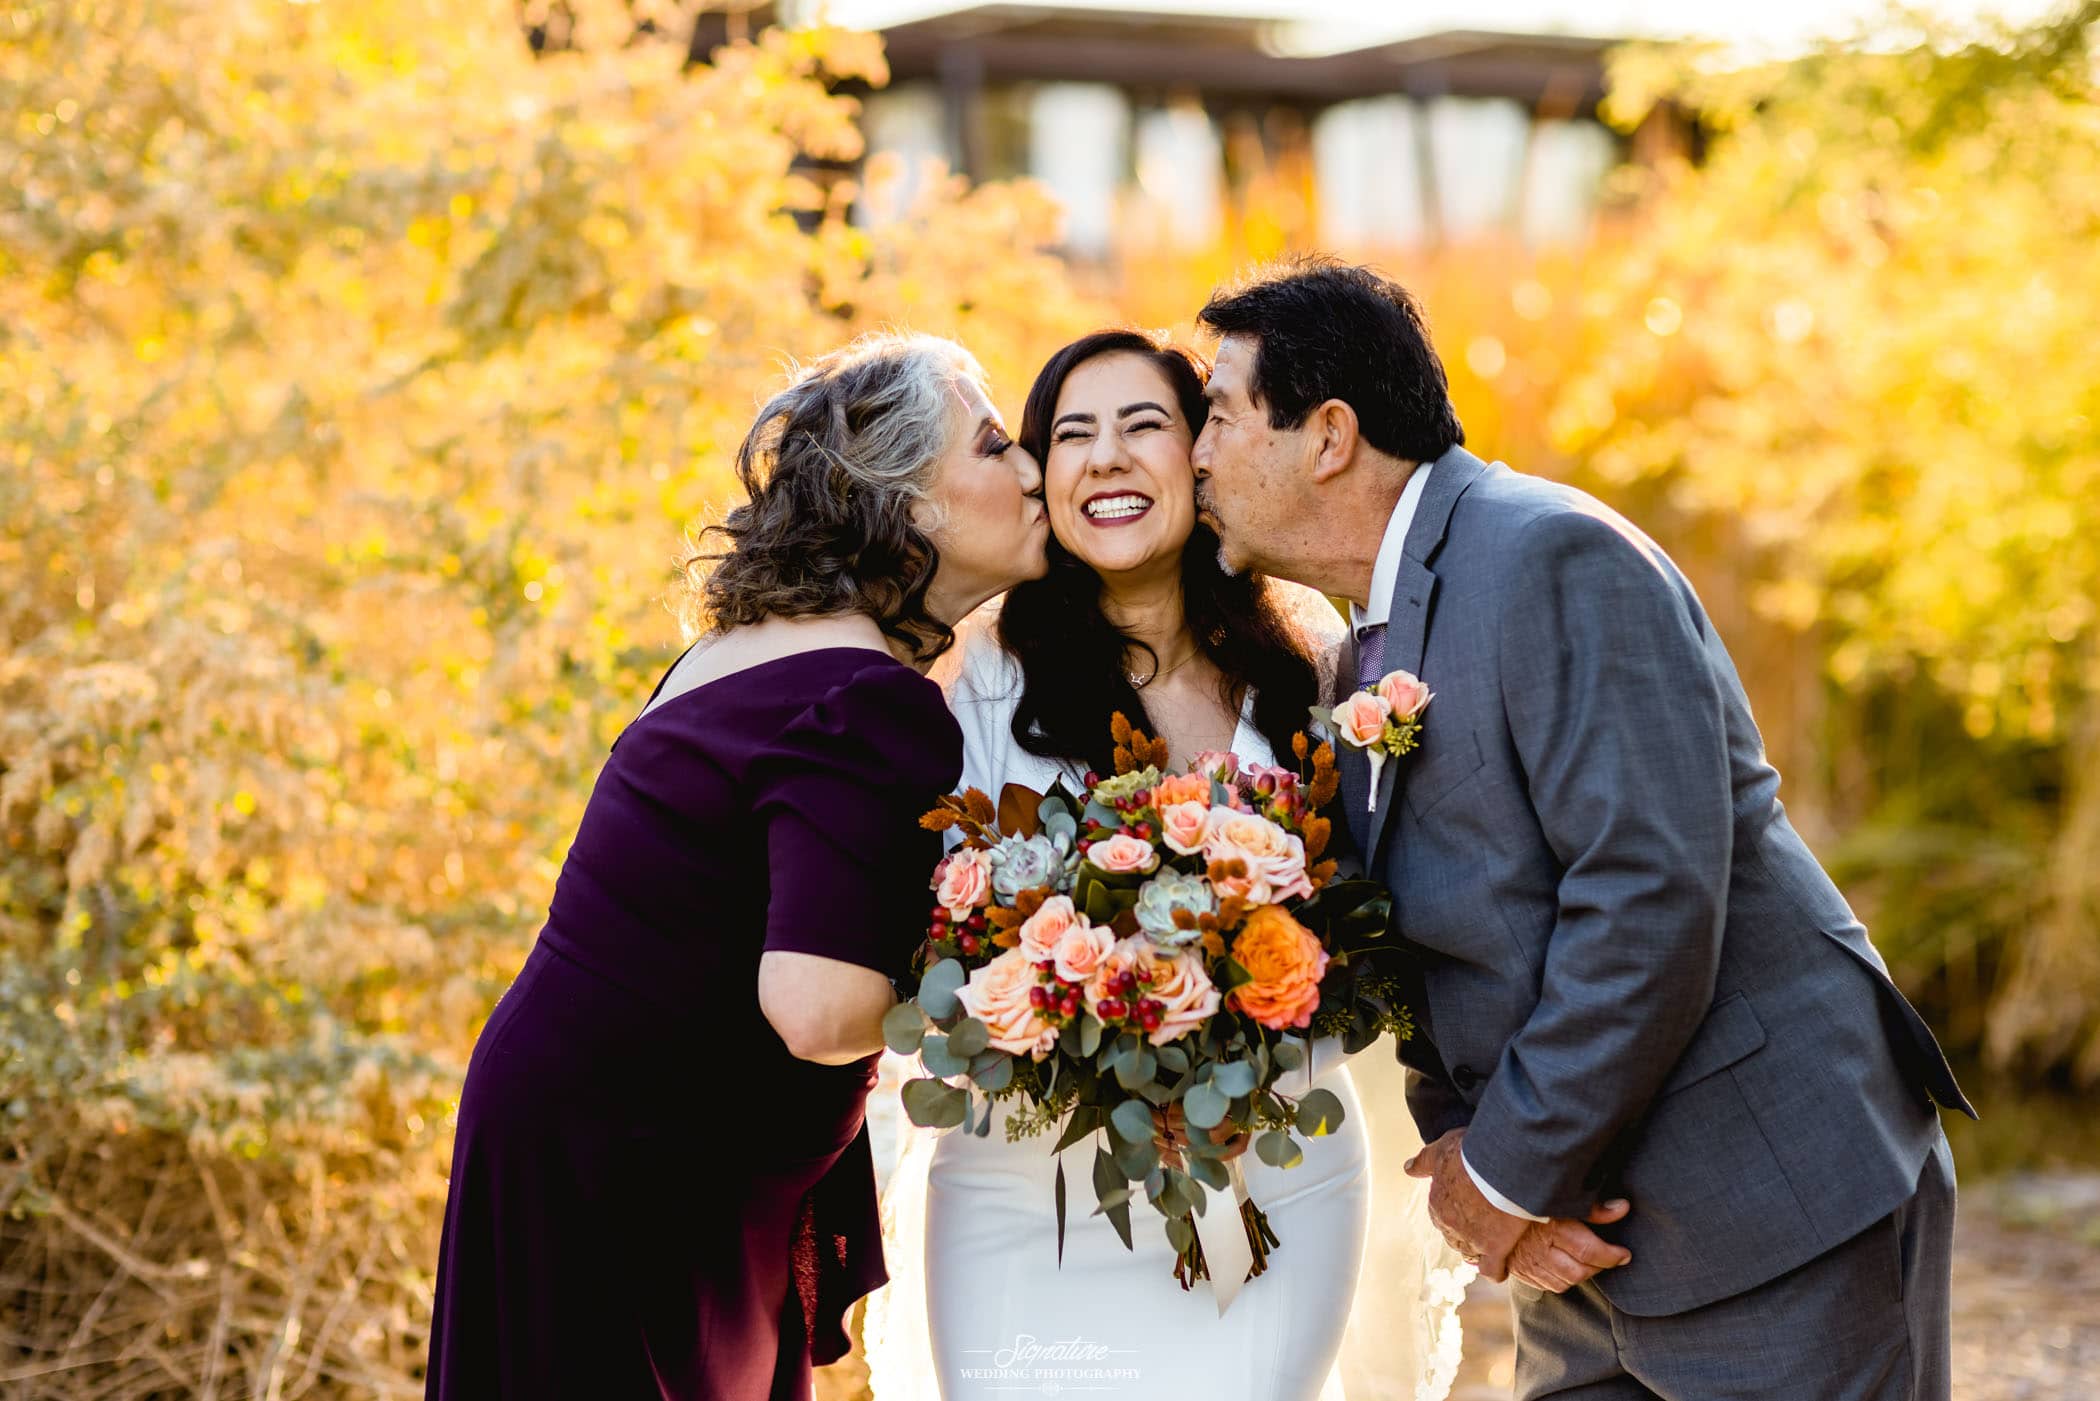 Bride with parents kissing her cheeks